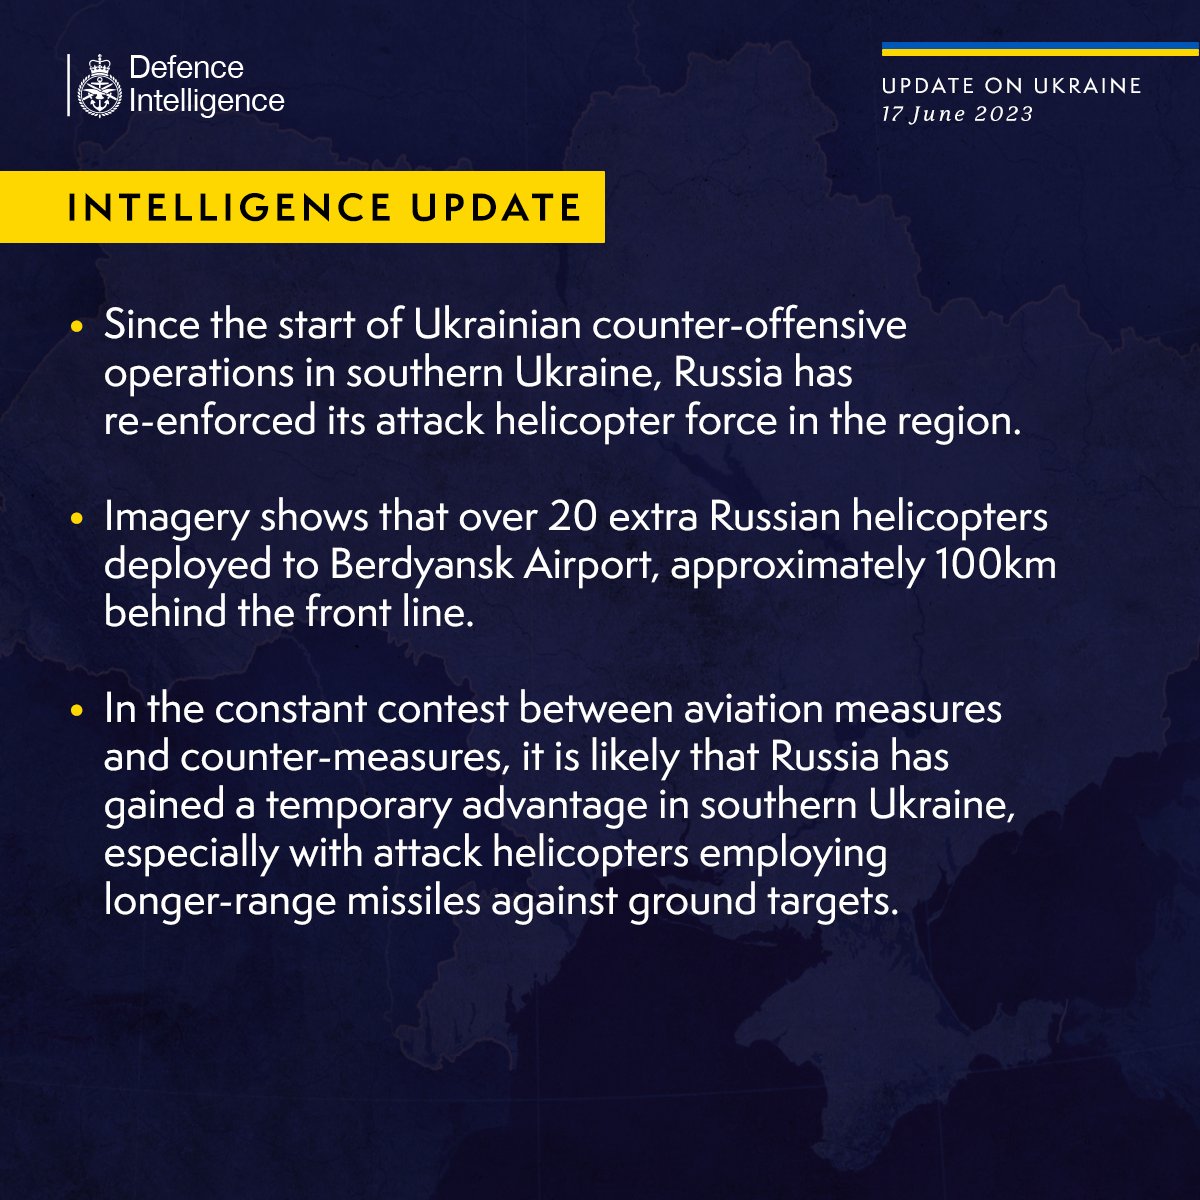 Latest Defence Intelligence update on the situation in Ukraine - 17 June 2023. Find out more about Defence Intelligence's use of language: ow.ly/TpGr50OQZ3Z 🇺🇦 #StandWithUkraine 🇺🇦